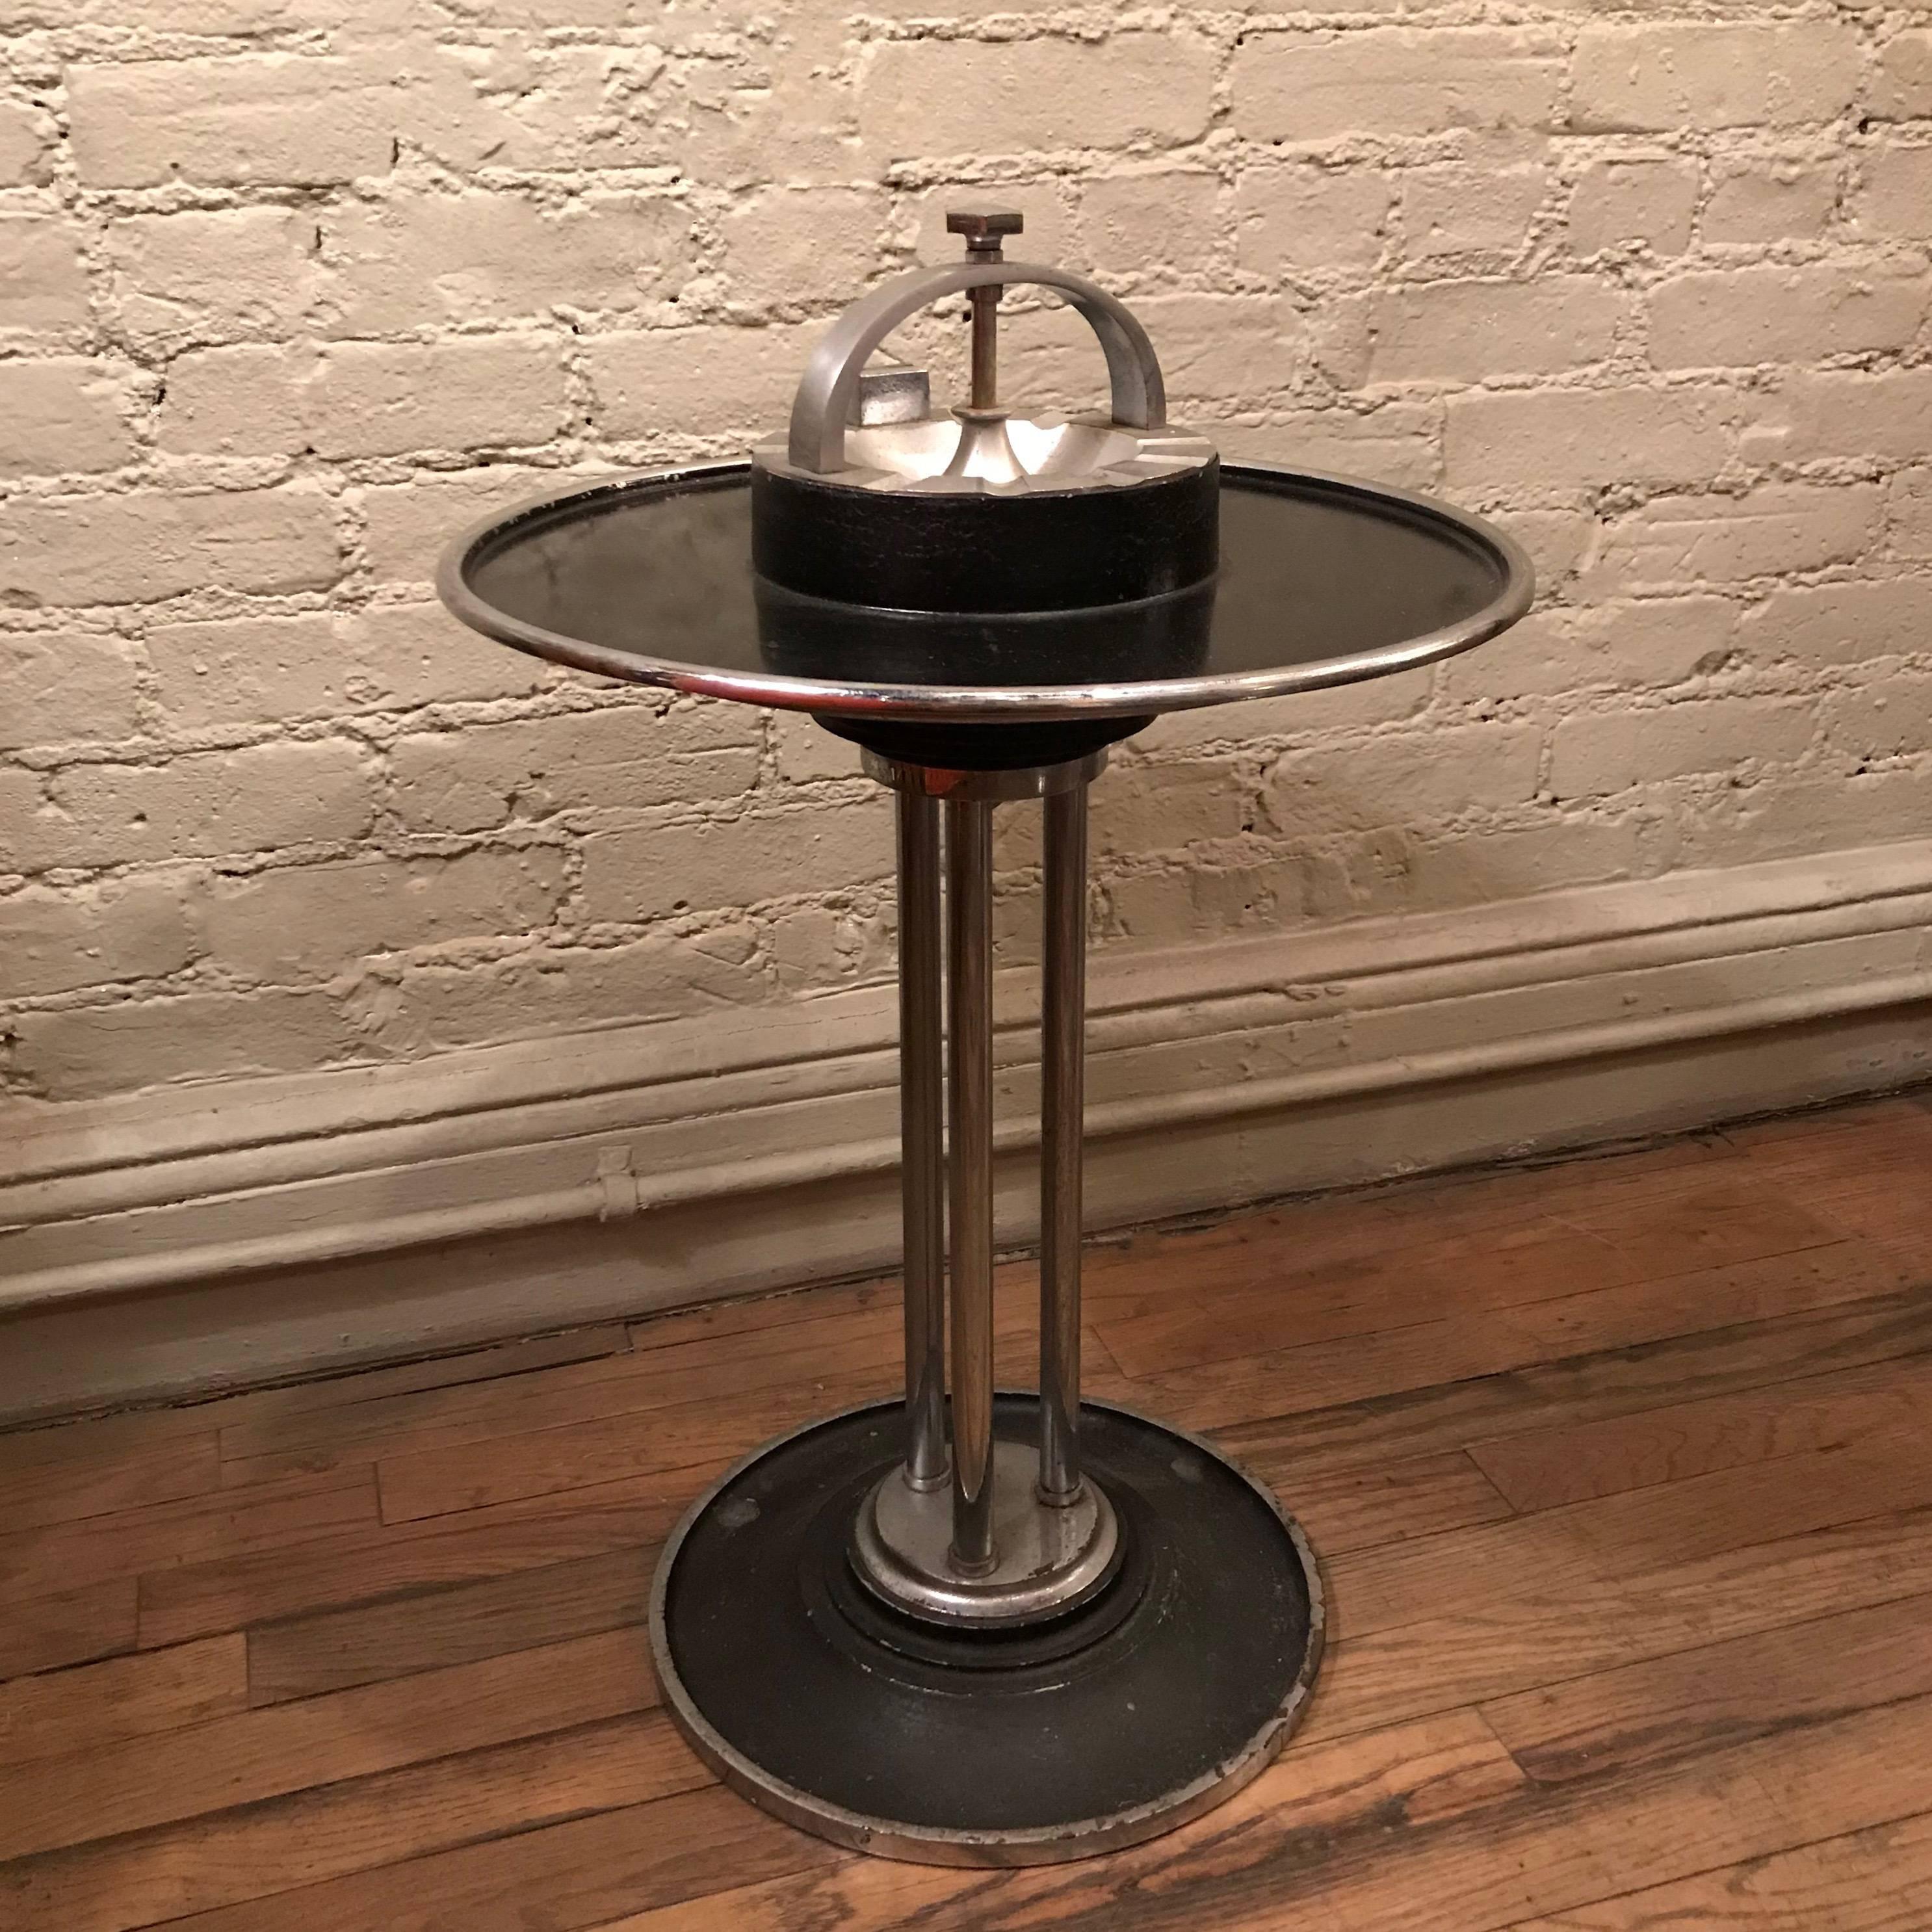 Art Deco, train car, standing ashtray table or cocktail smoker stand by W.J. Campbell Machine Company, Indianapolis, IN. features chrome and aluminum details and a heavy cast iron base. The outer ring is a tray lifts off for easy clearing away.